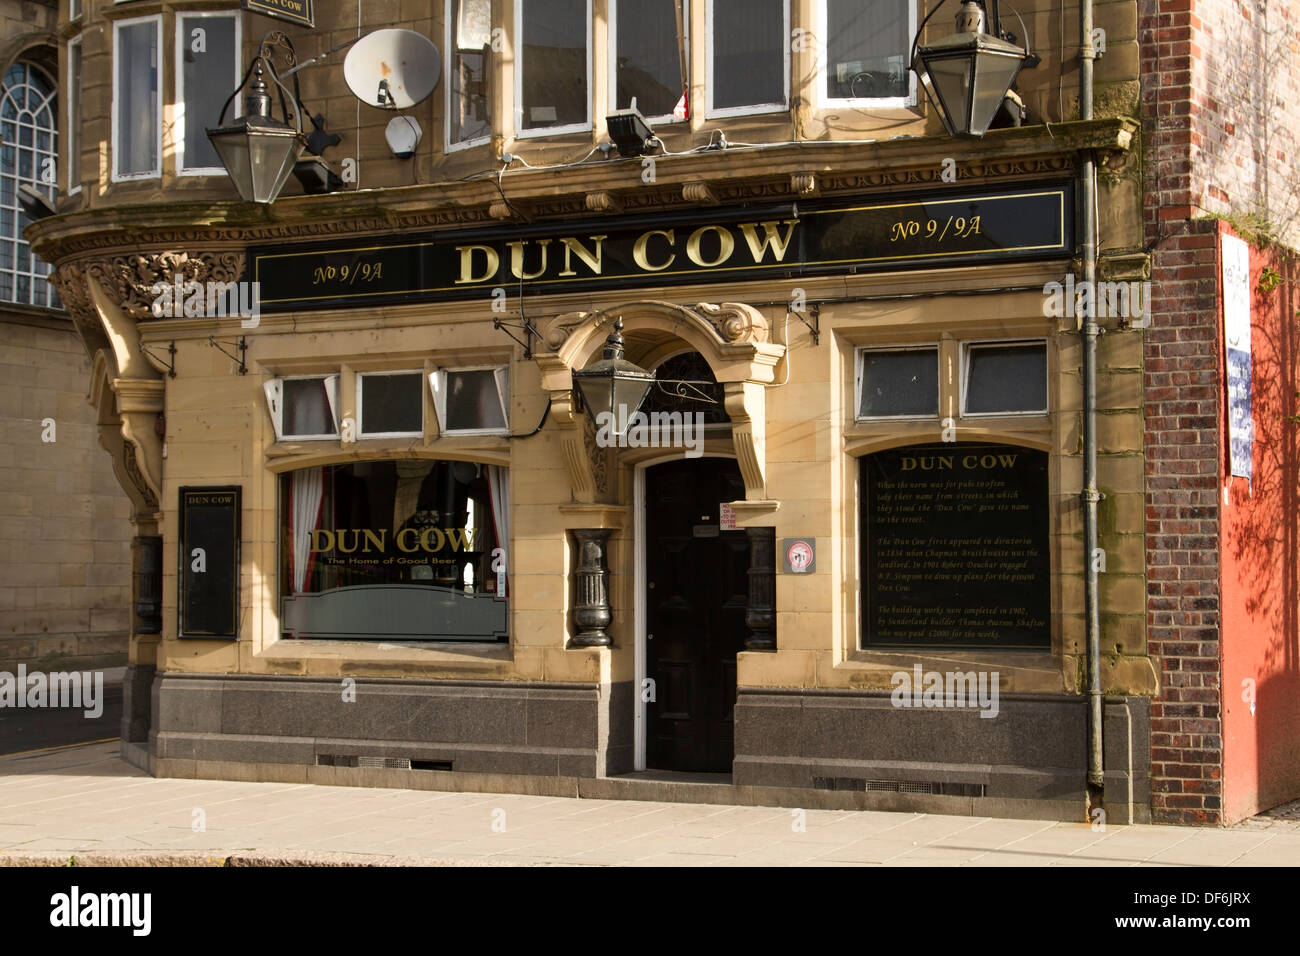 The Dun Cow Public House in Sunderland, North East England Stock Photo